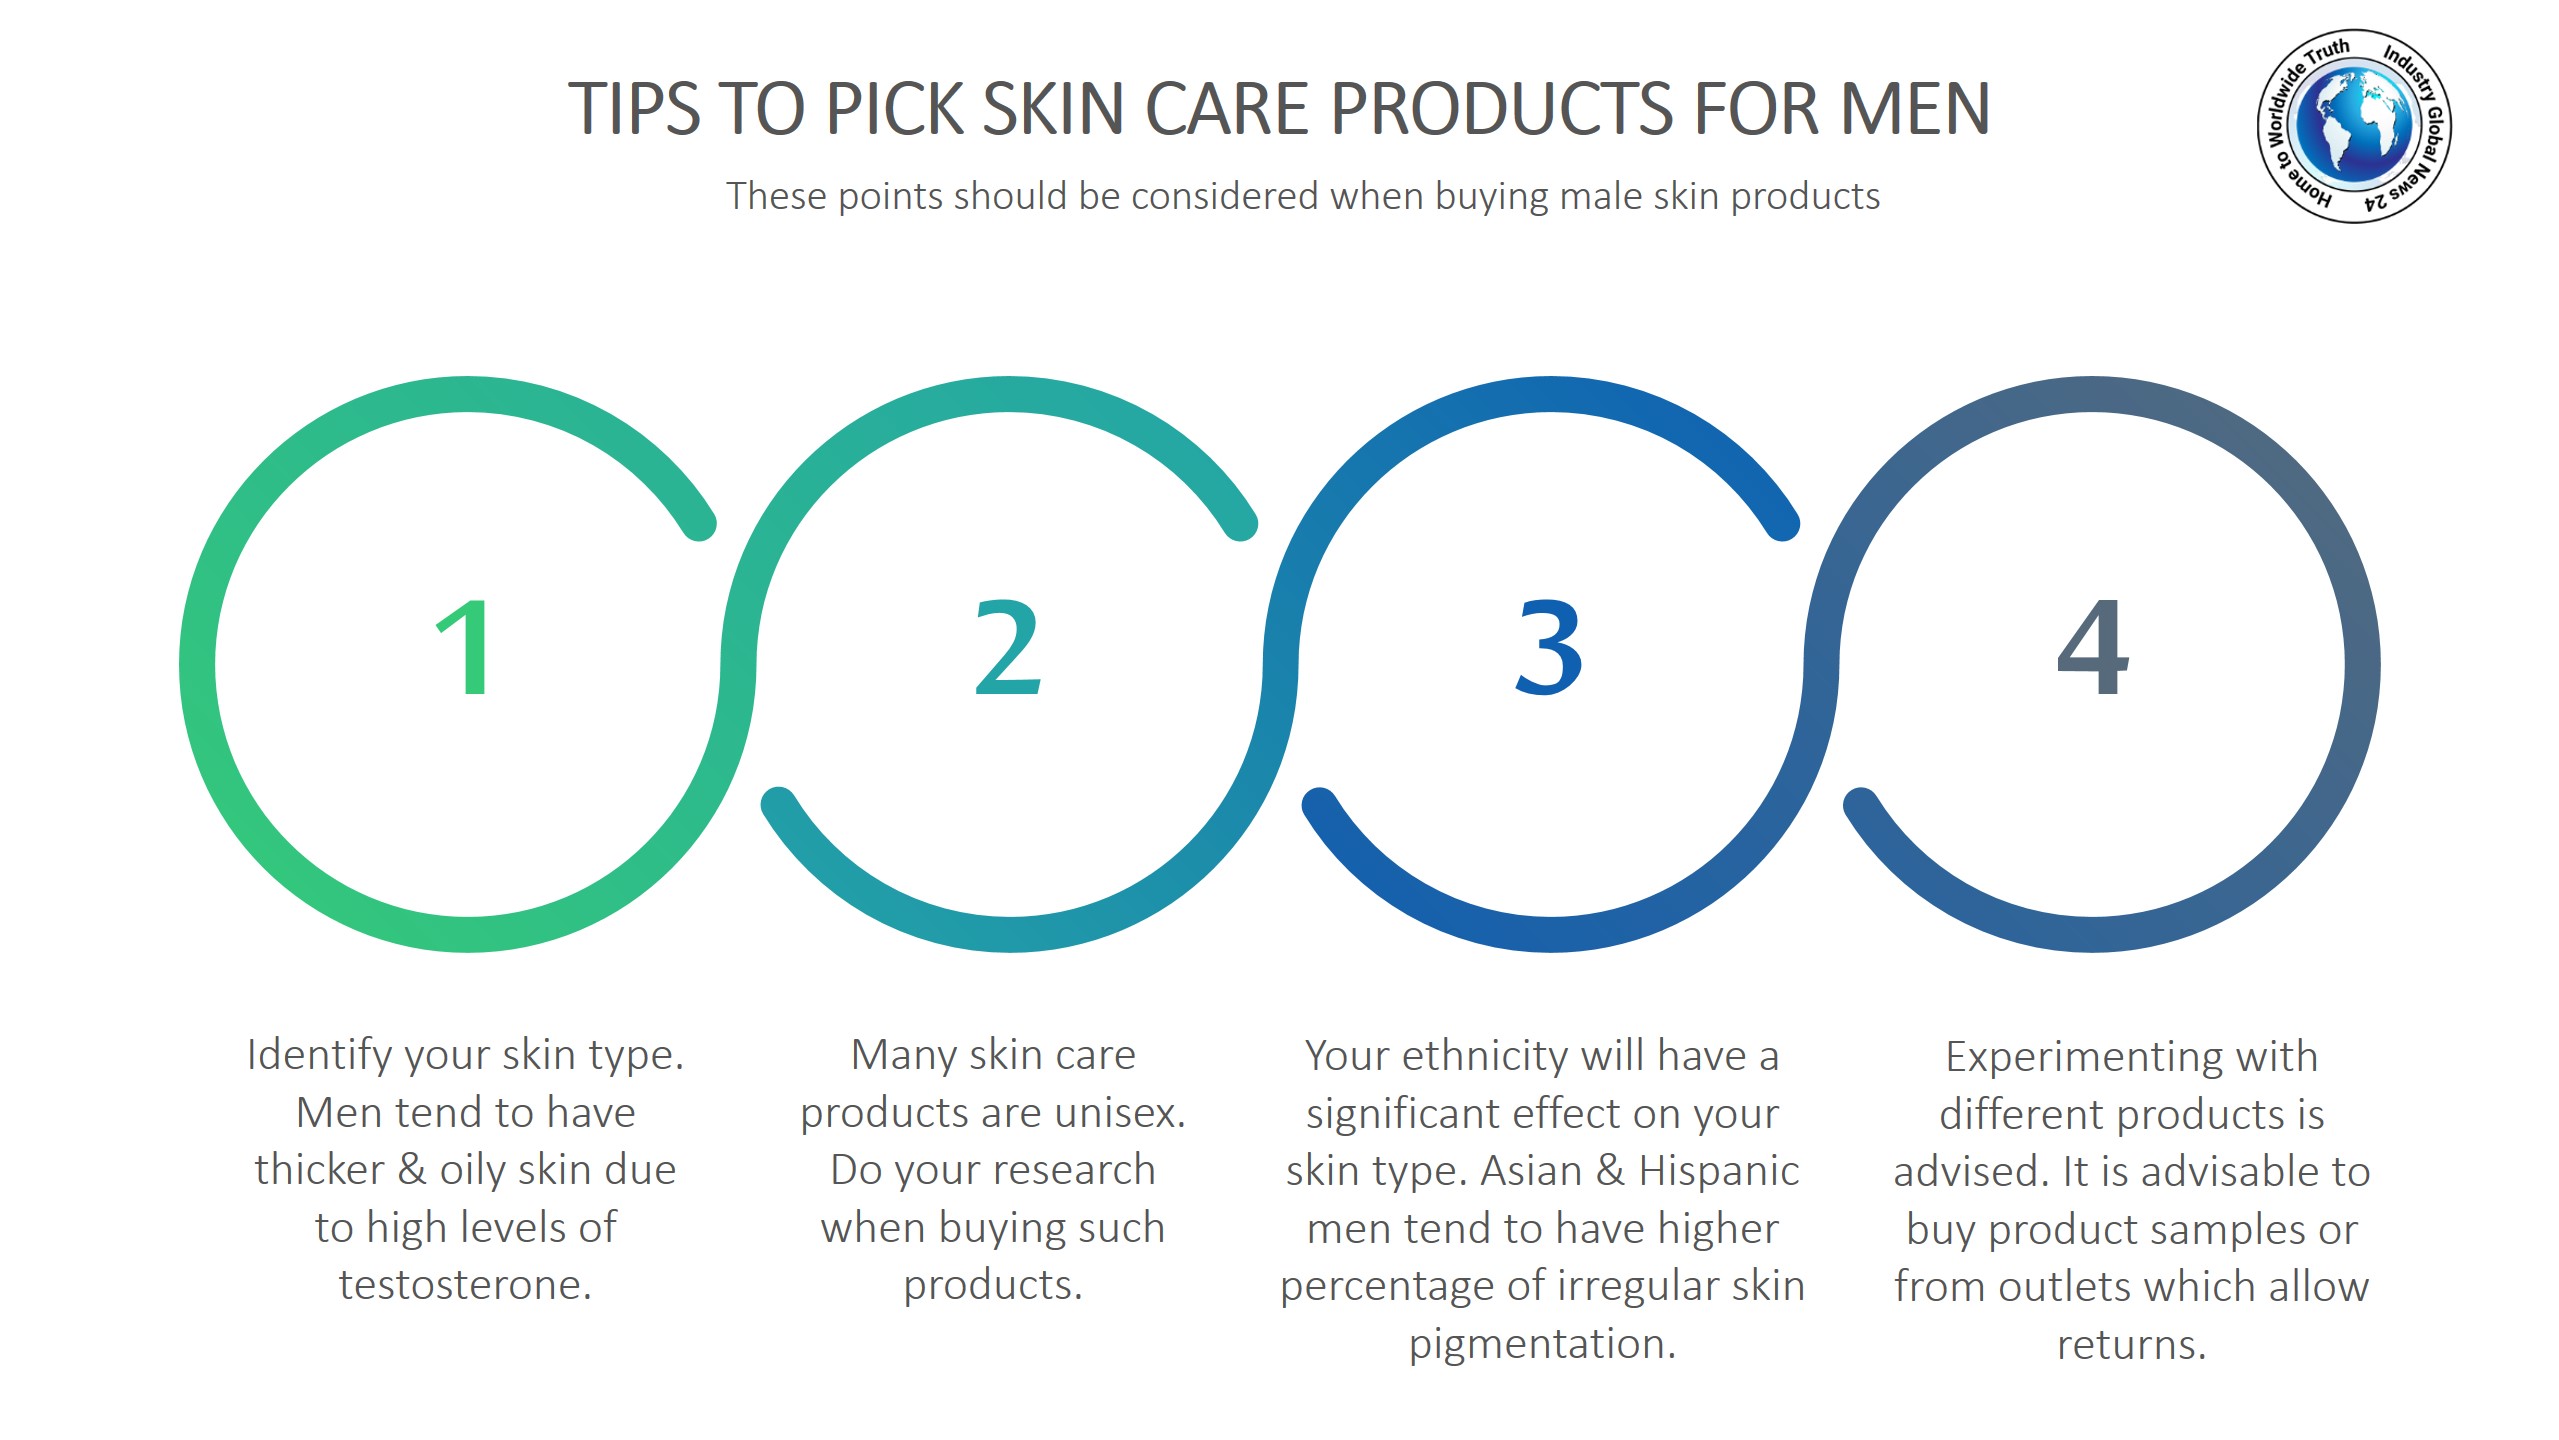 Tips to pick skin care products for men